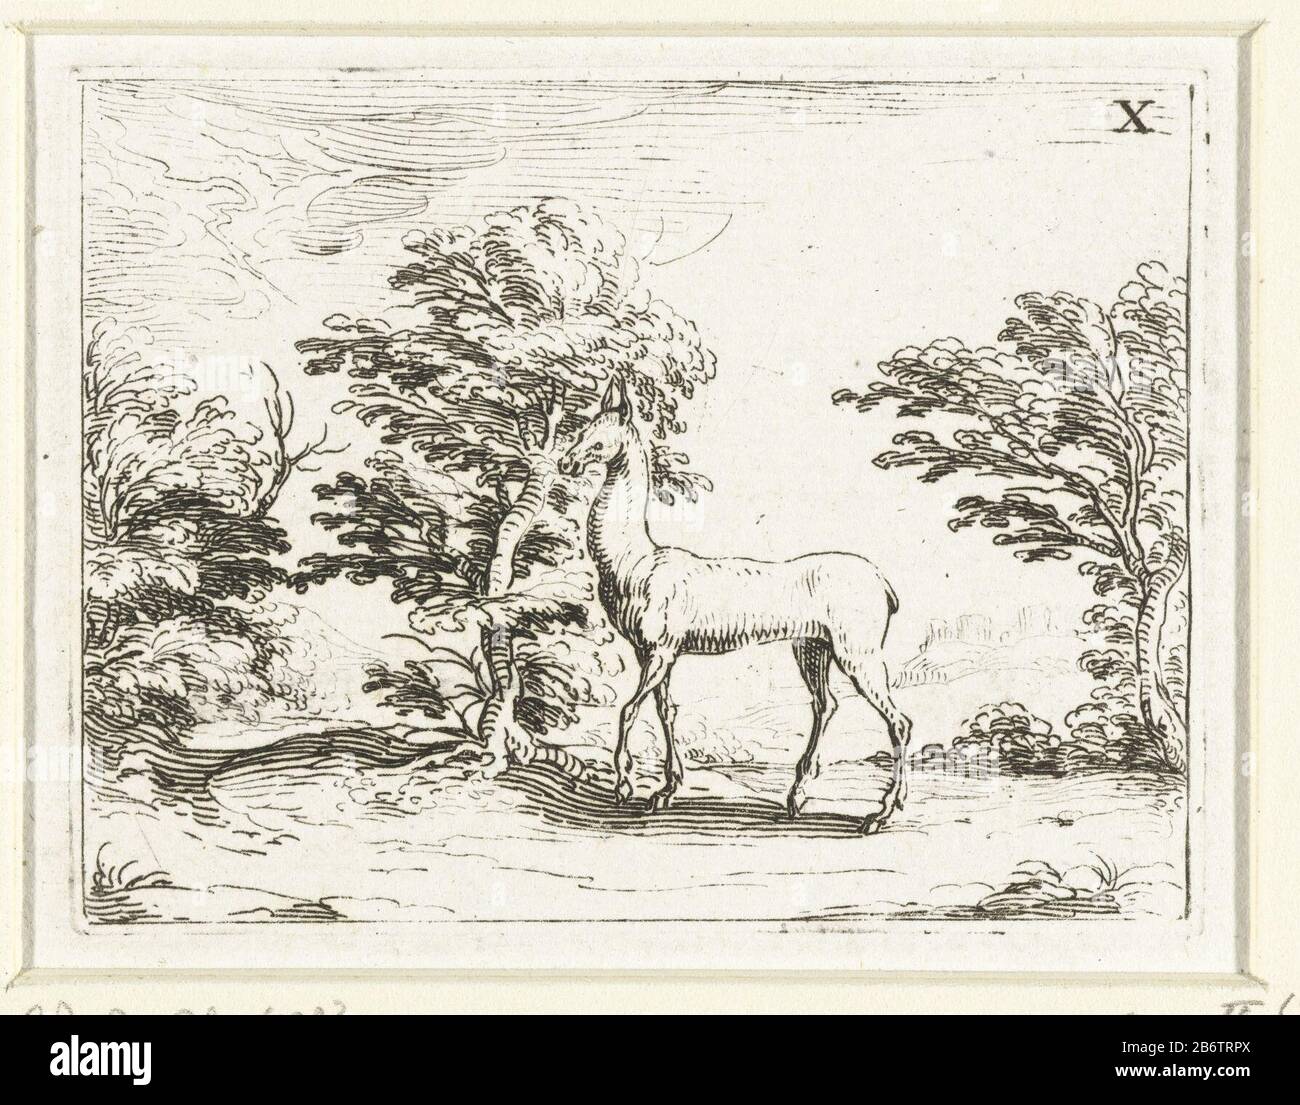 Hinde in een bos Leven van Maria in emblemen (serietitel) Presentation of a deer in a wooded area. This chapter is part of the emblem series 'Life of Mary in emblems. The first condition of this series includes in addition to a title page and 26 emblems also three blades with hymns to Mary in letterpress without afbeelding. Manufacturer : printmaker Jacques Callotuitgever: François Langlois Place manufacture: printmaker Nancy Publisher: Paris Date: 1625-1629 and / or 1646 Physical features : etching material: paper Technique: etching dimensions: plate edge: h 62 mm × 81 b mm Subject: hoofed an Stock Photo